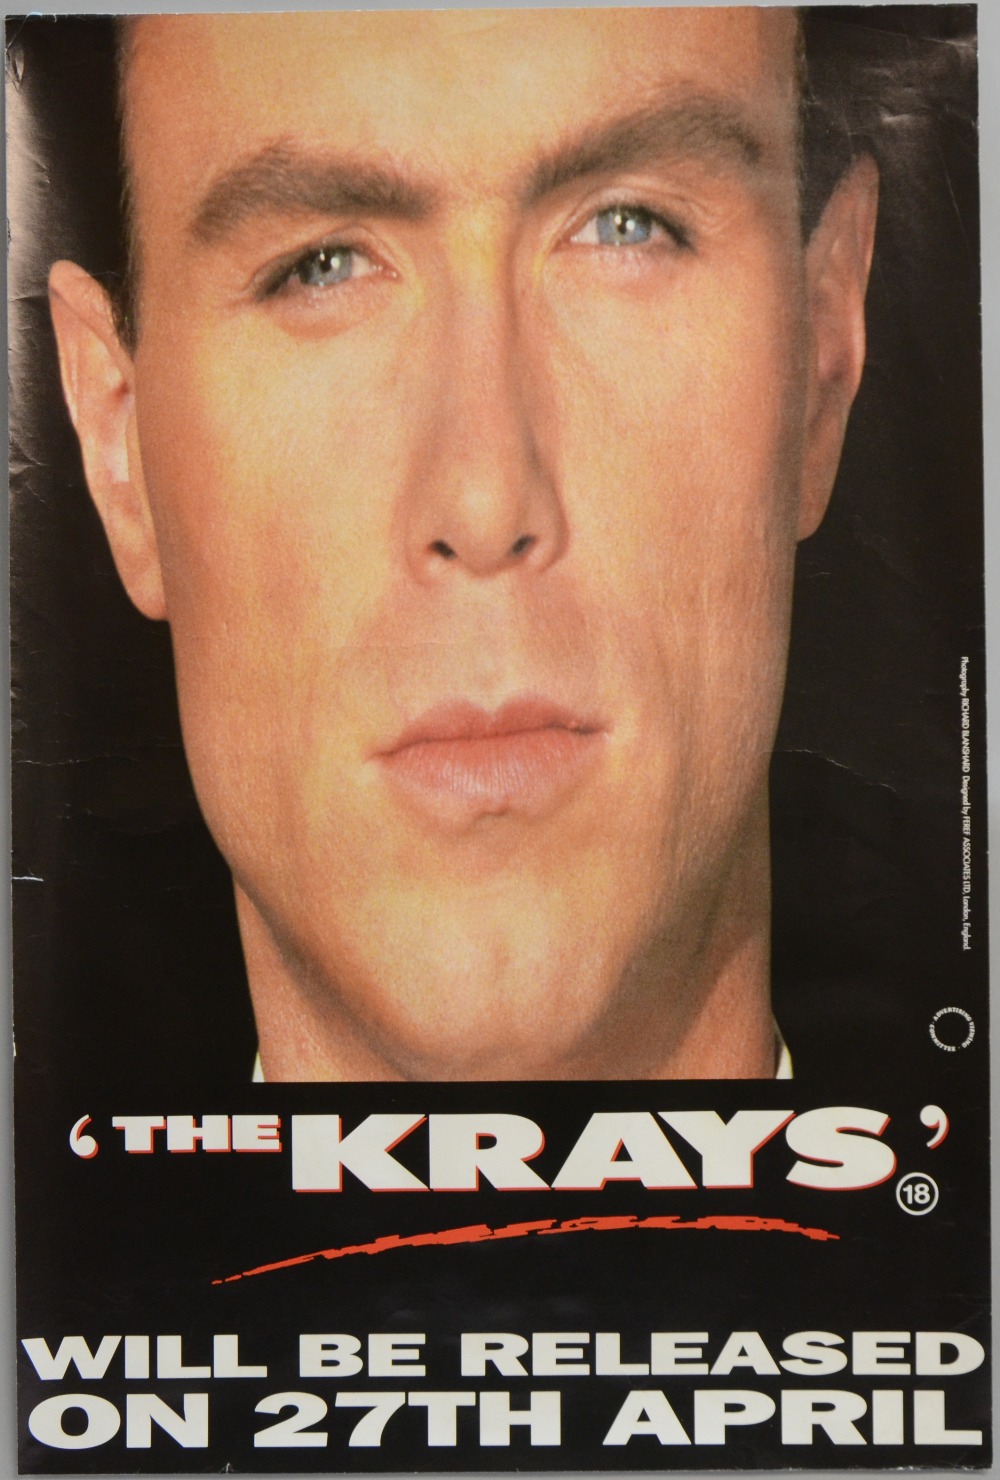 The Krays (1990) British double-crown film poster, rolled 30 x 20 inches51 x 76cm - Image 3 of 3